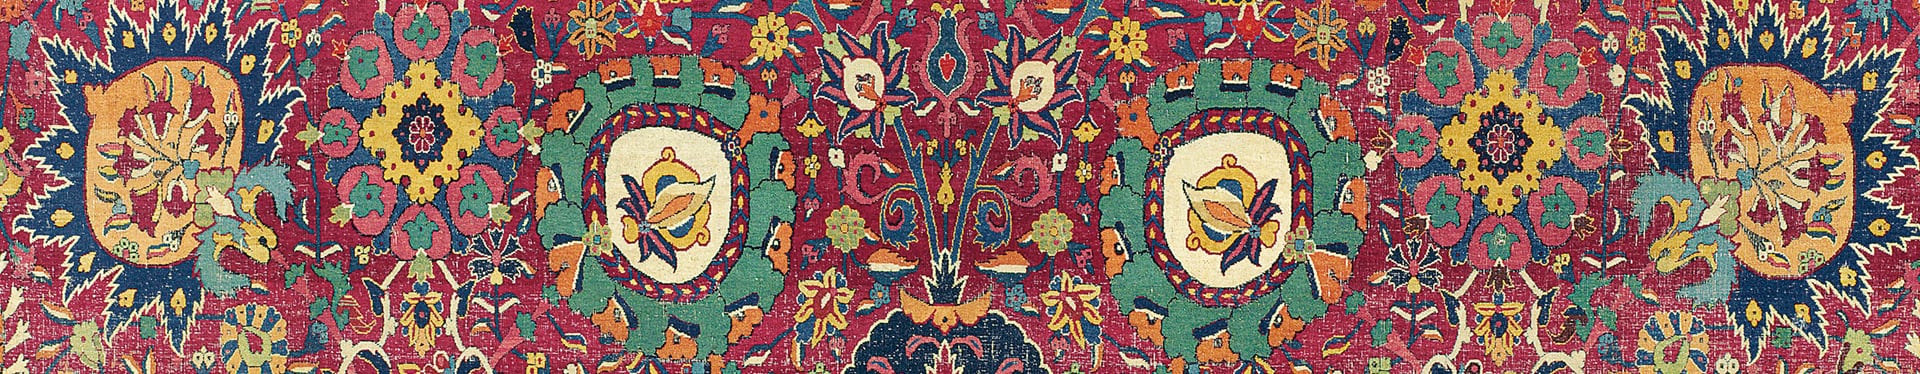 rugs-and-carpets-christies-department-banner-new-2019_45_1_20190404125231.jpg